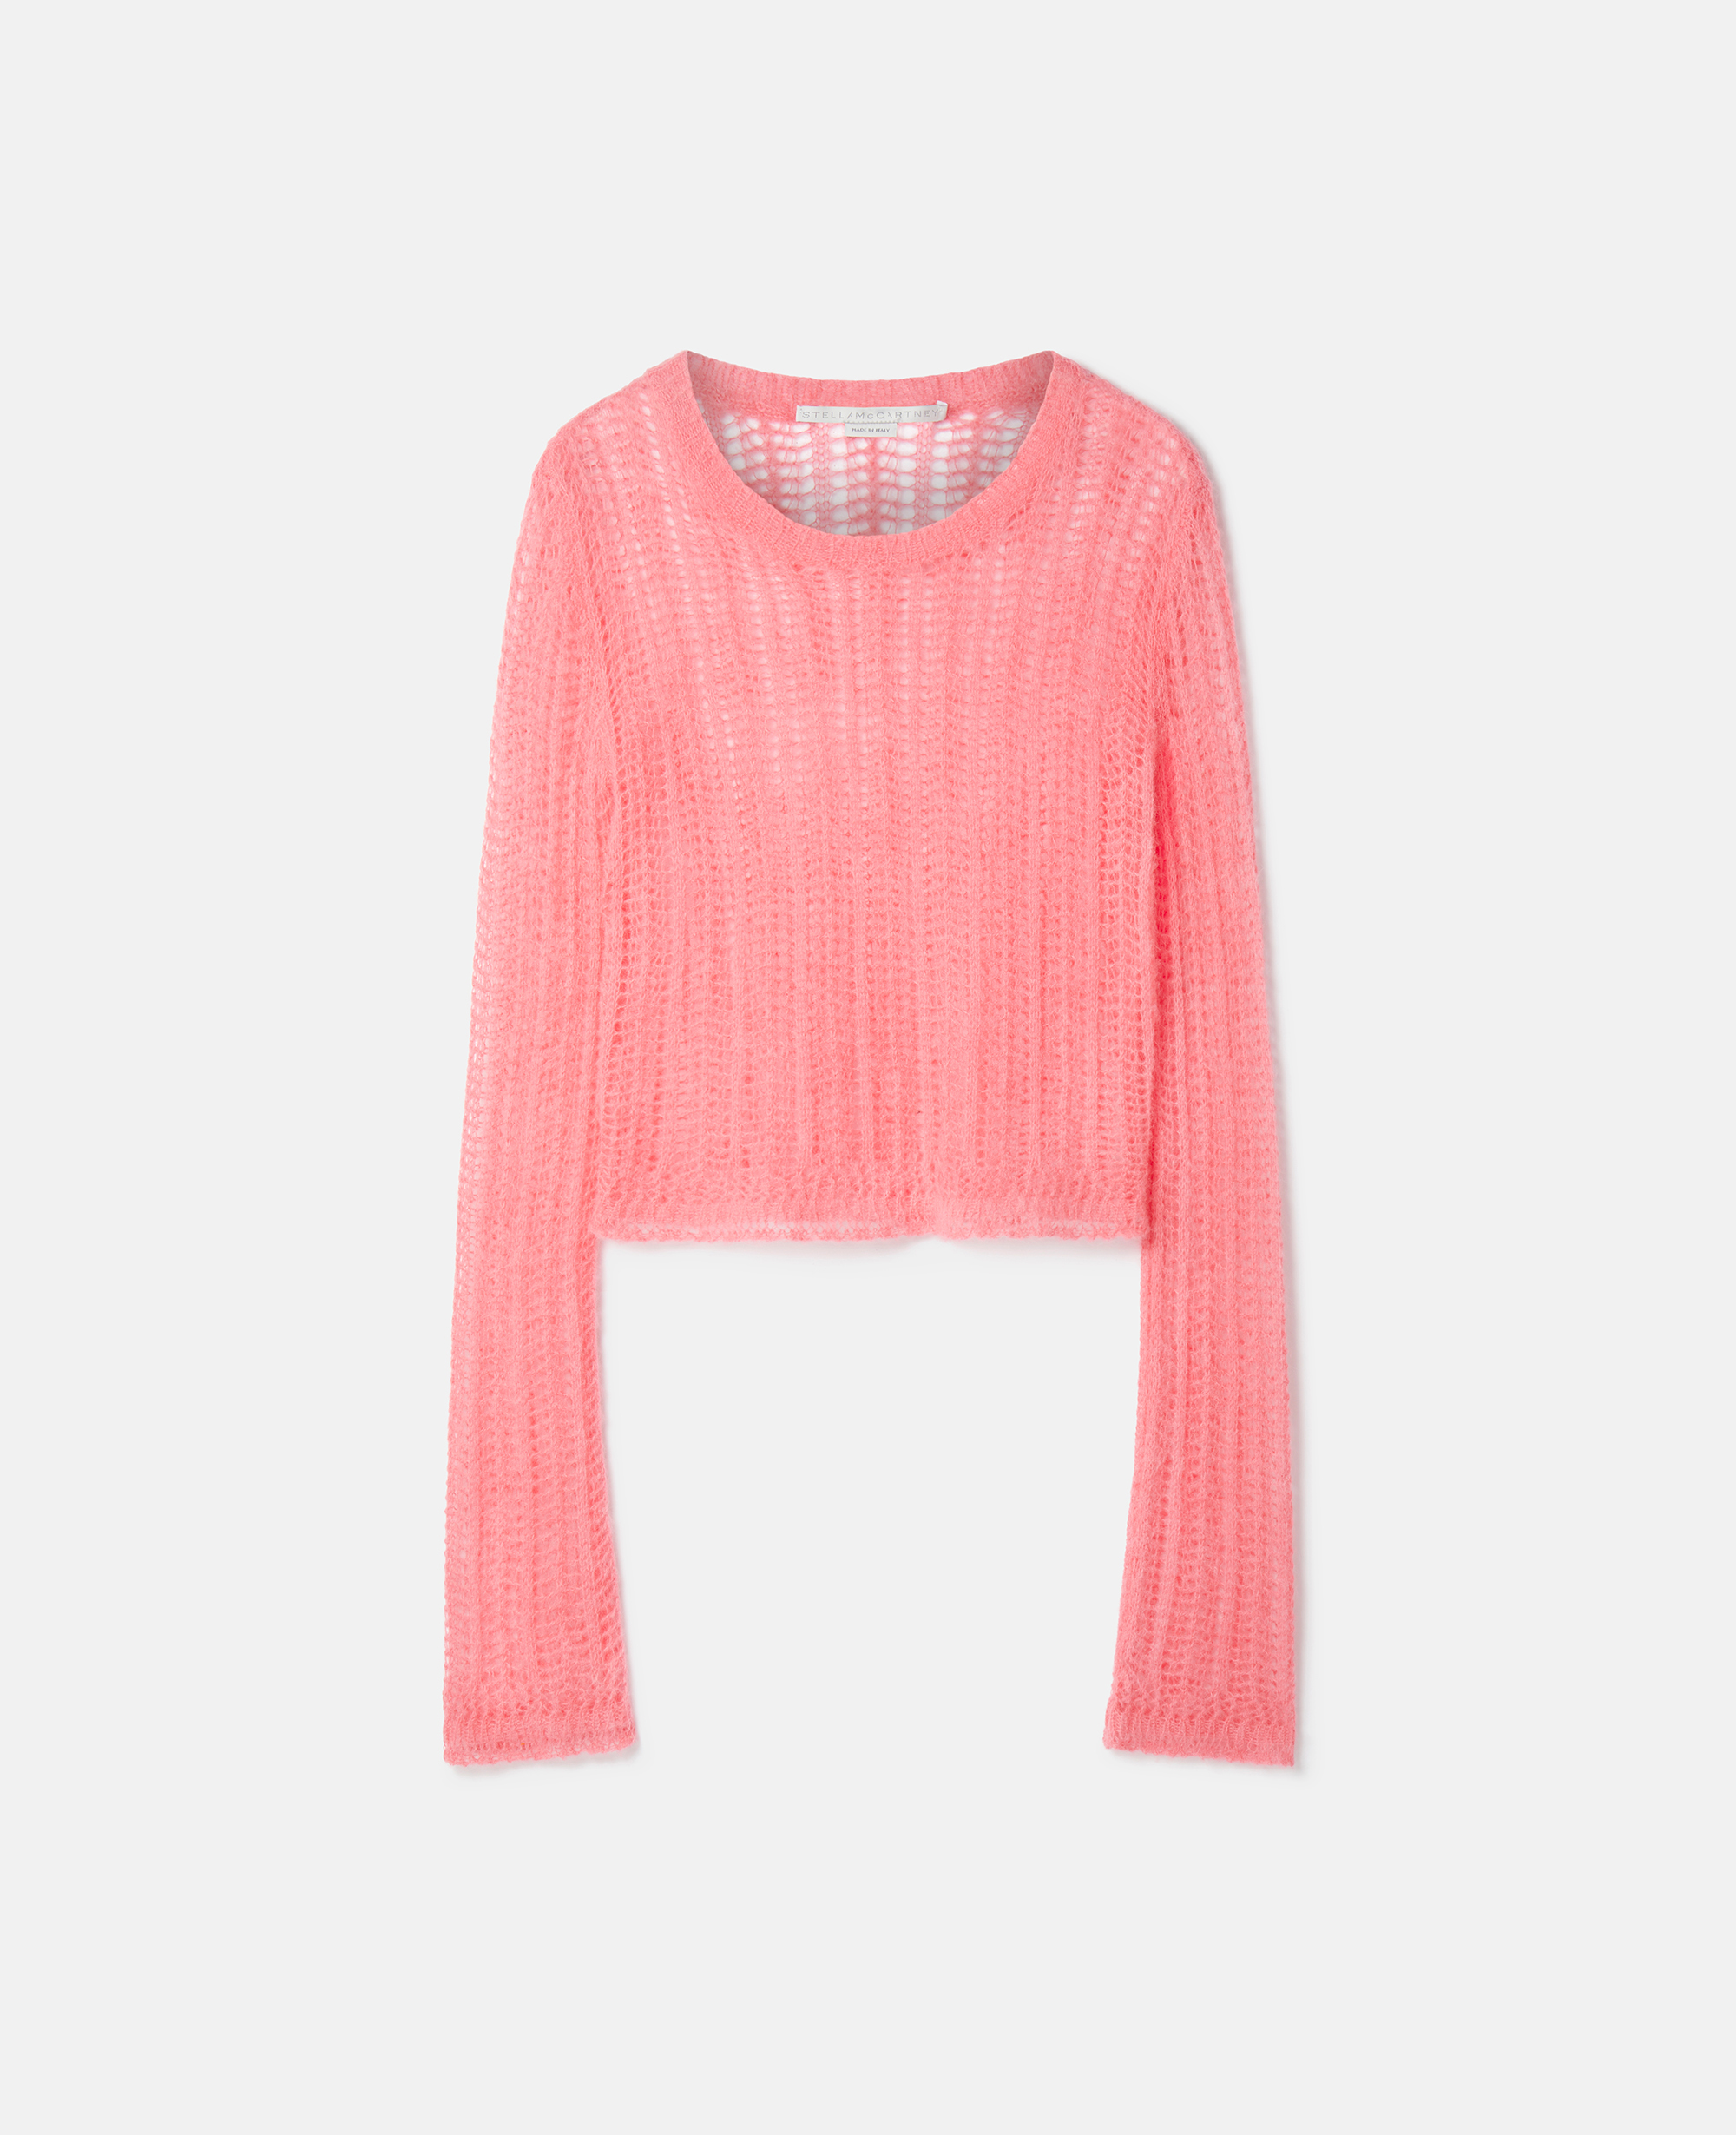 Stella Mccartney Airy Lace Knit Jumper In Pink